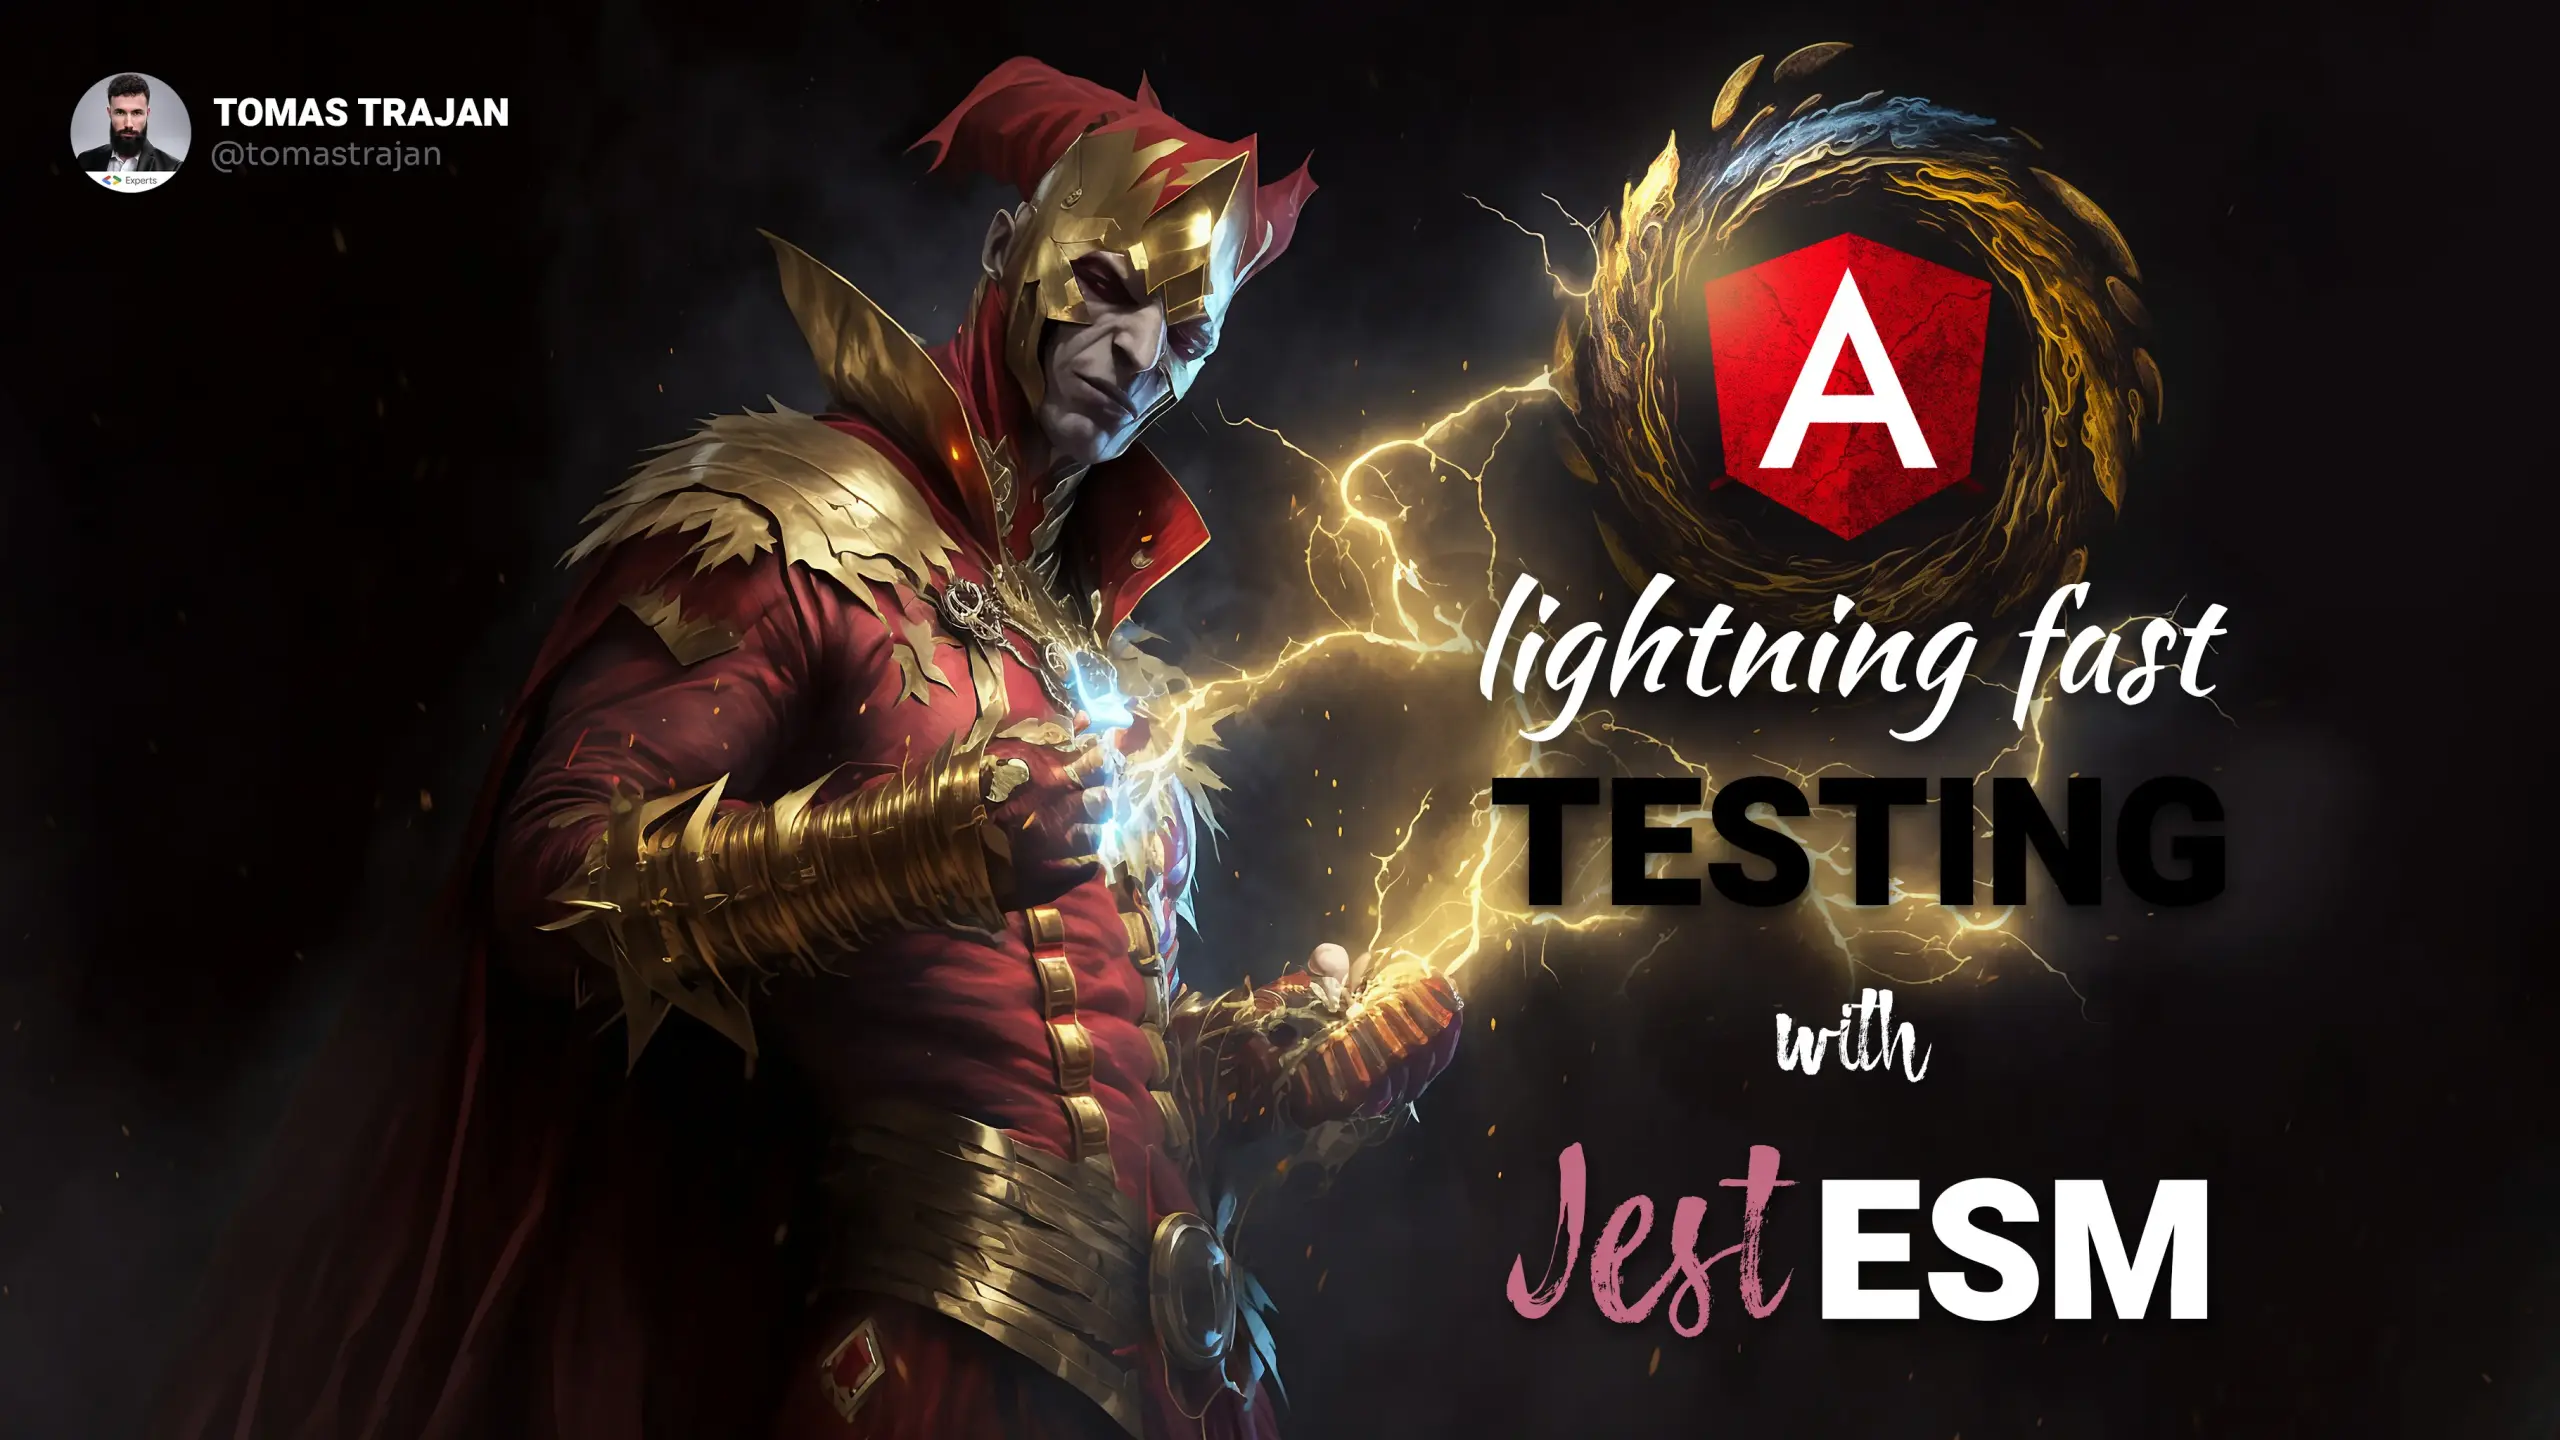 Jest ESM - Total Guide To More Than 100% Faster Testing For Angular ⚡